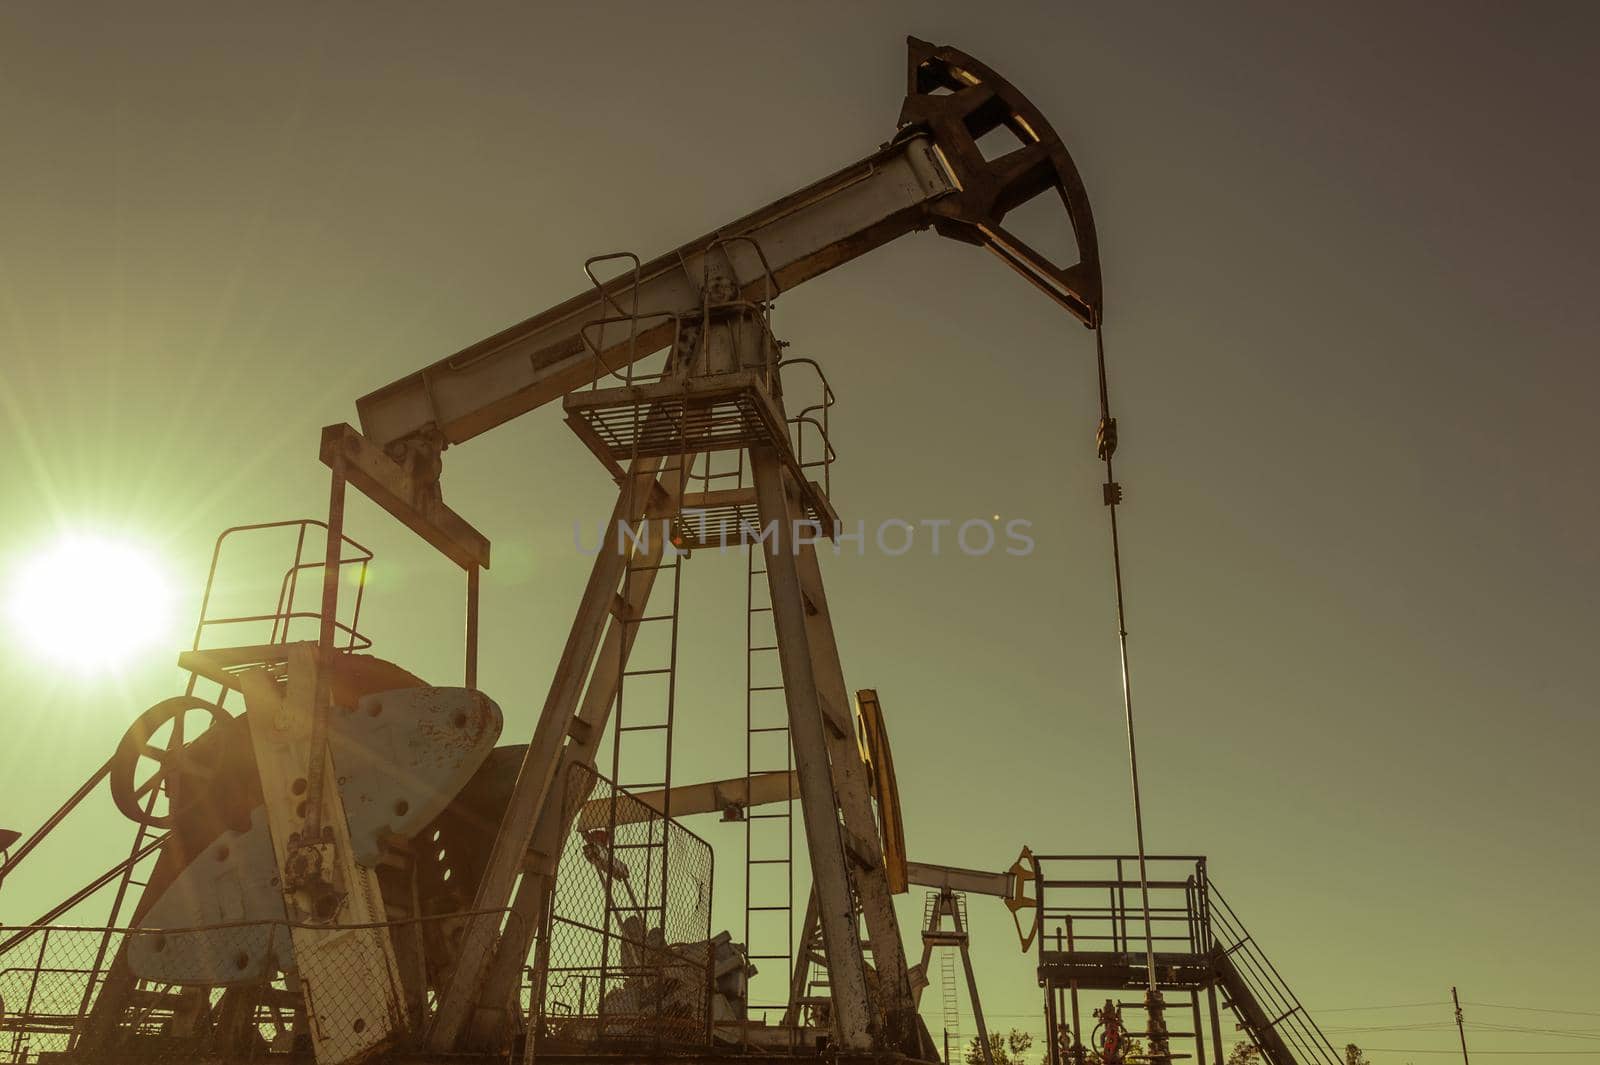 Oil pump rig operation on the platform in oil and gas industry. Pumpjack, industrial equipment. Oilfield site, oil pump are running. Rocking machines for power genertion. Petroleum concept. Toned.